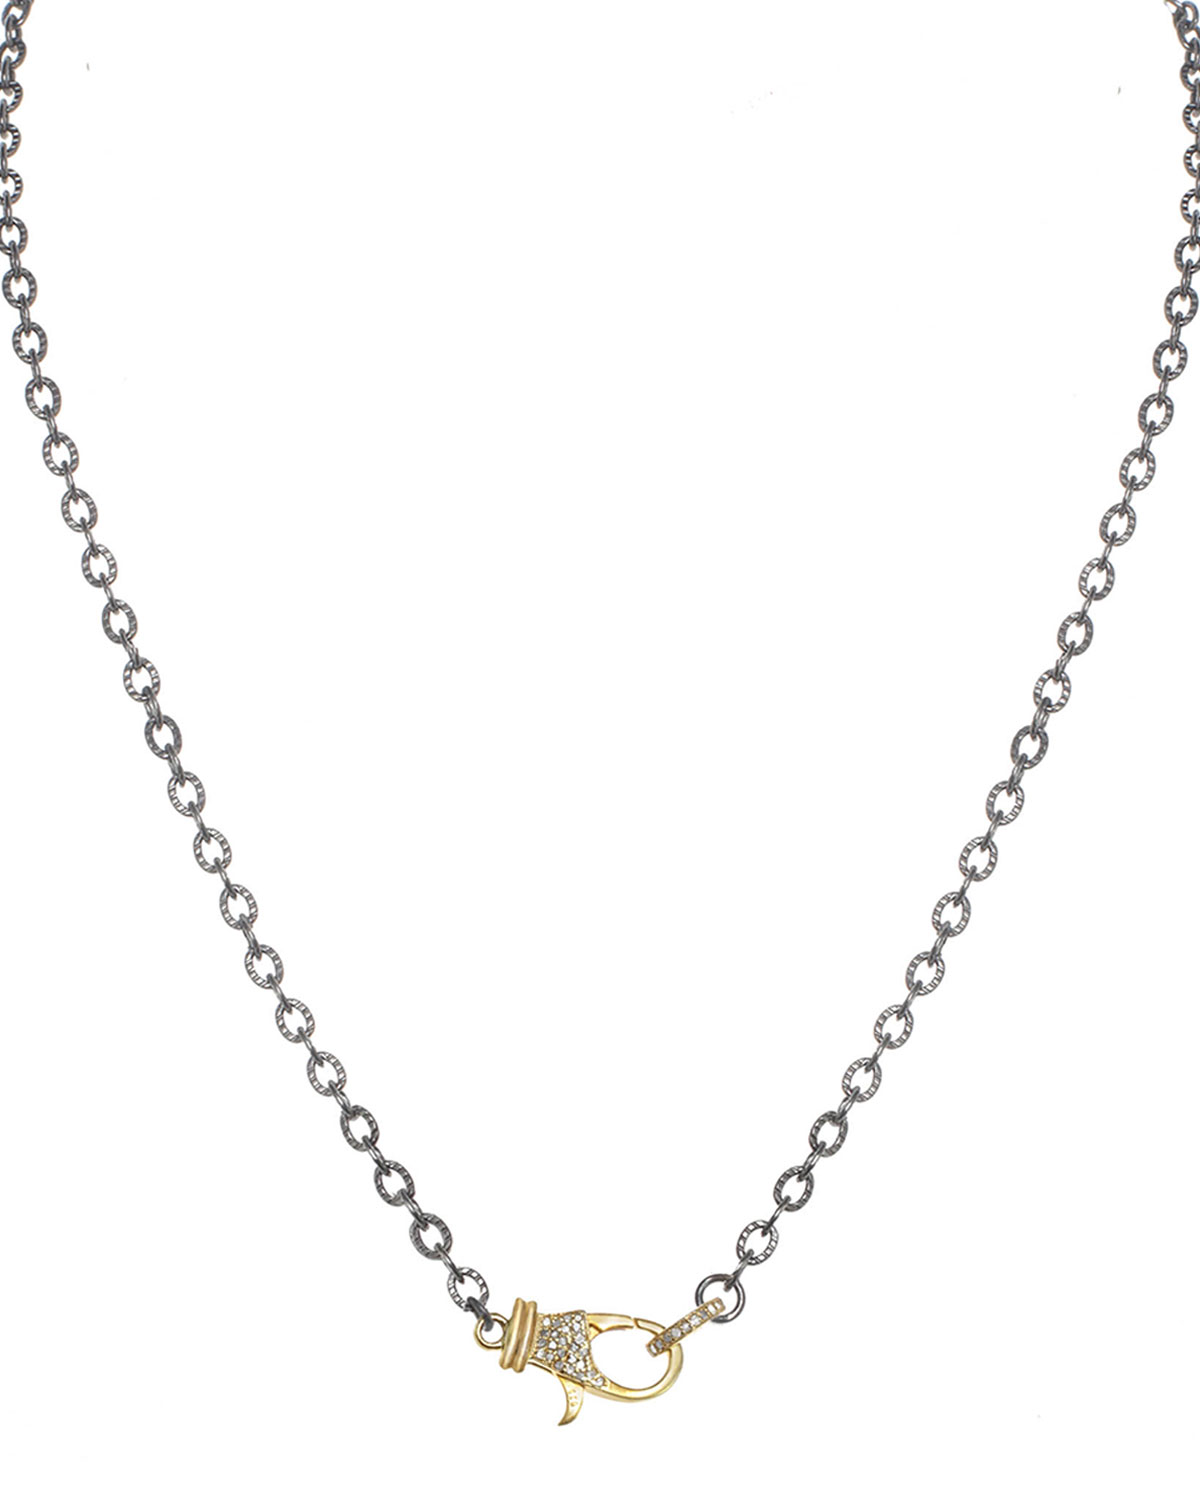 Margo Morrison Rhodium Finish Sterling Silver Chain With Vermeil And Diamond Clasp